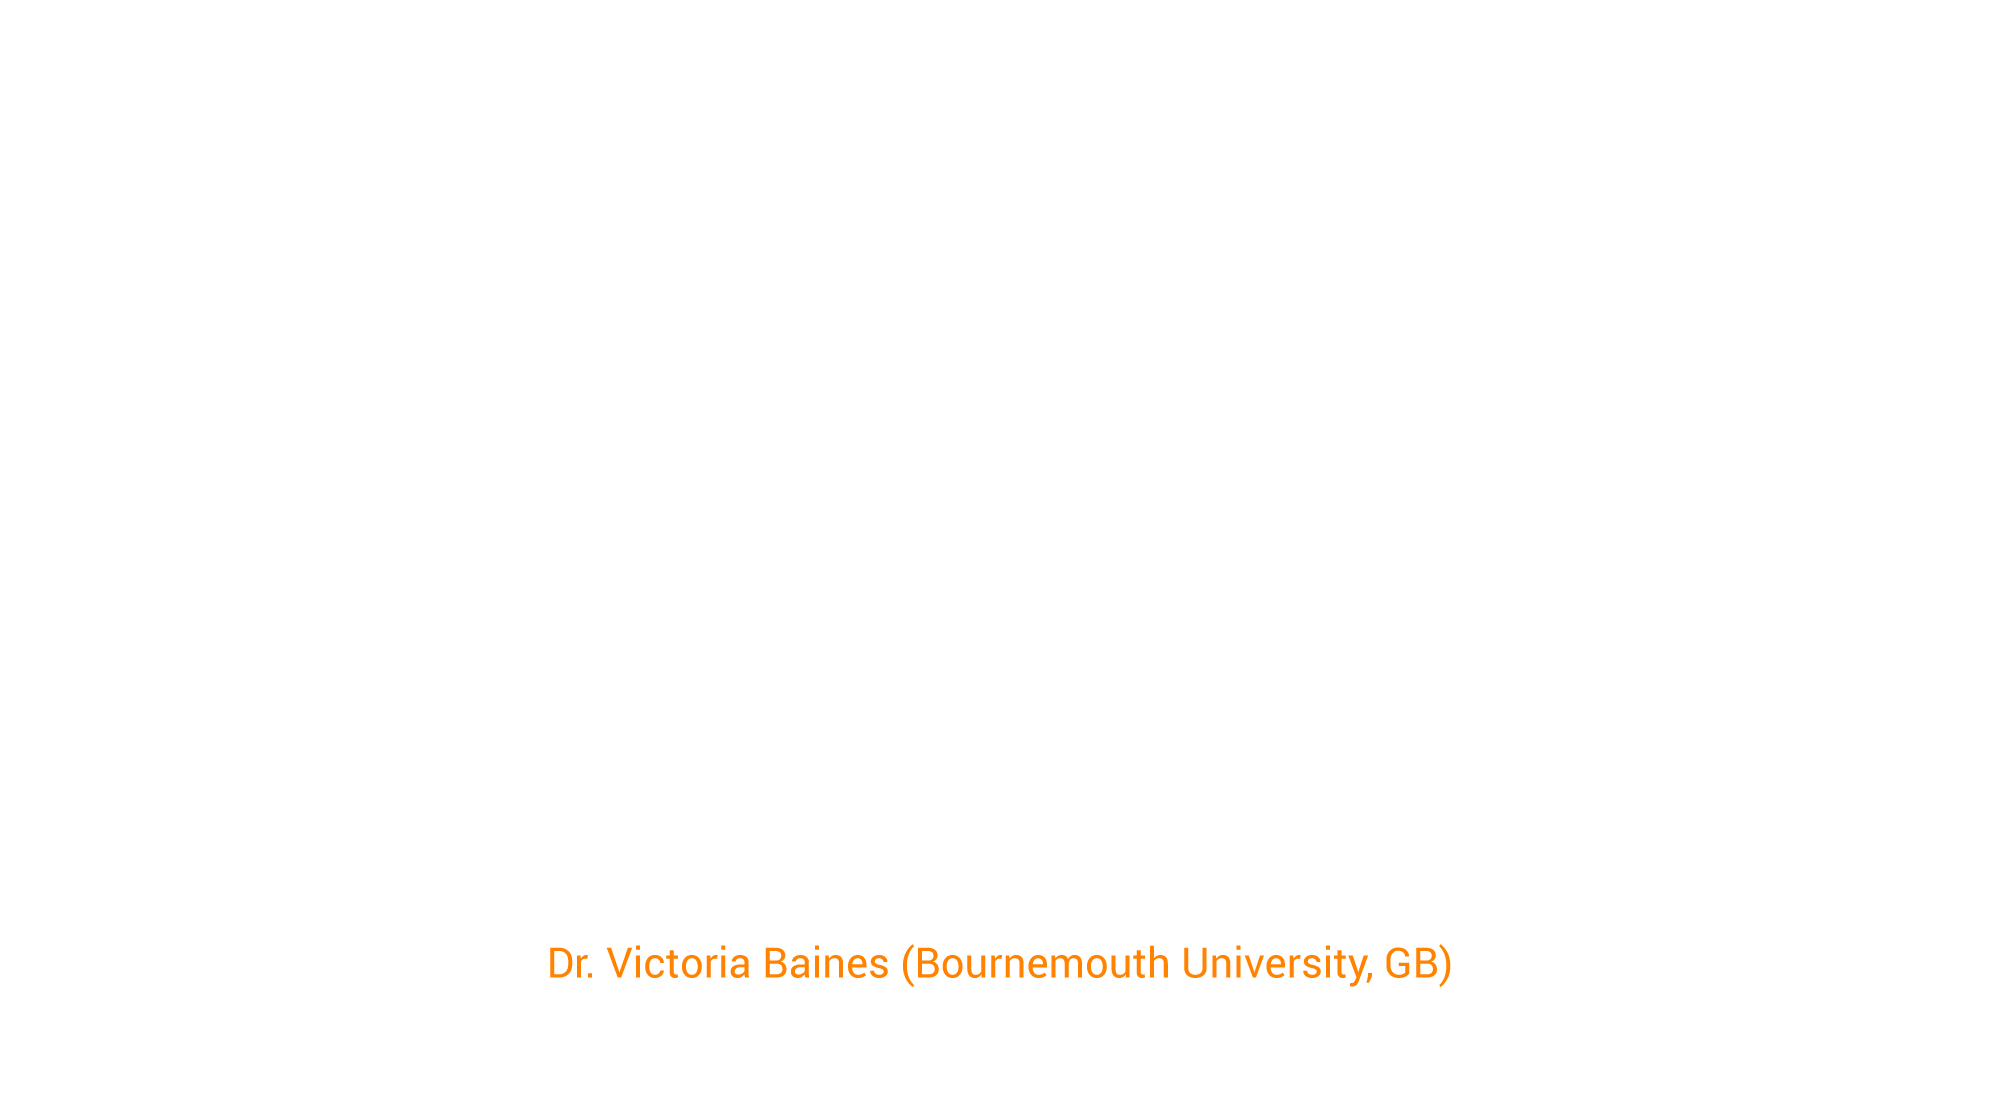 Keynote: Cybersecurity's Image Problem and What We Can All Do About It